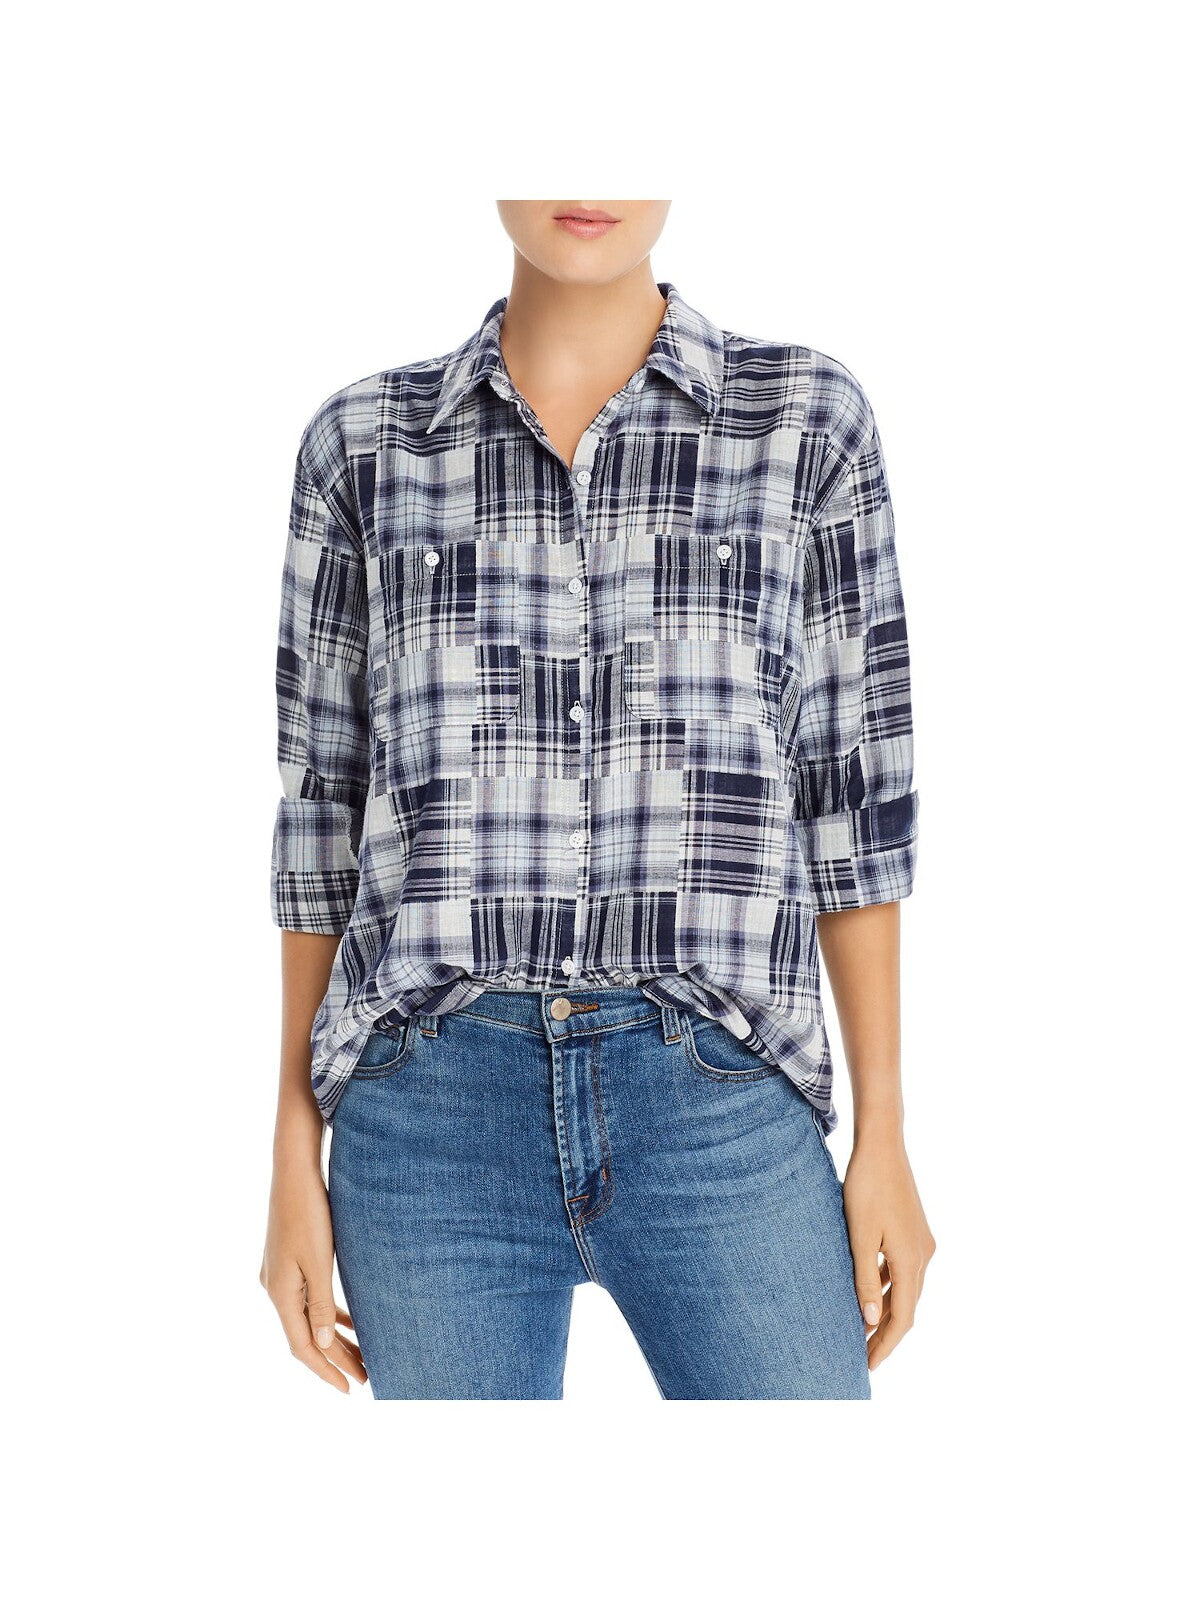 JOIE Womens Navy Plaid Cuffed Collared Button Up Top XS